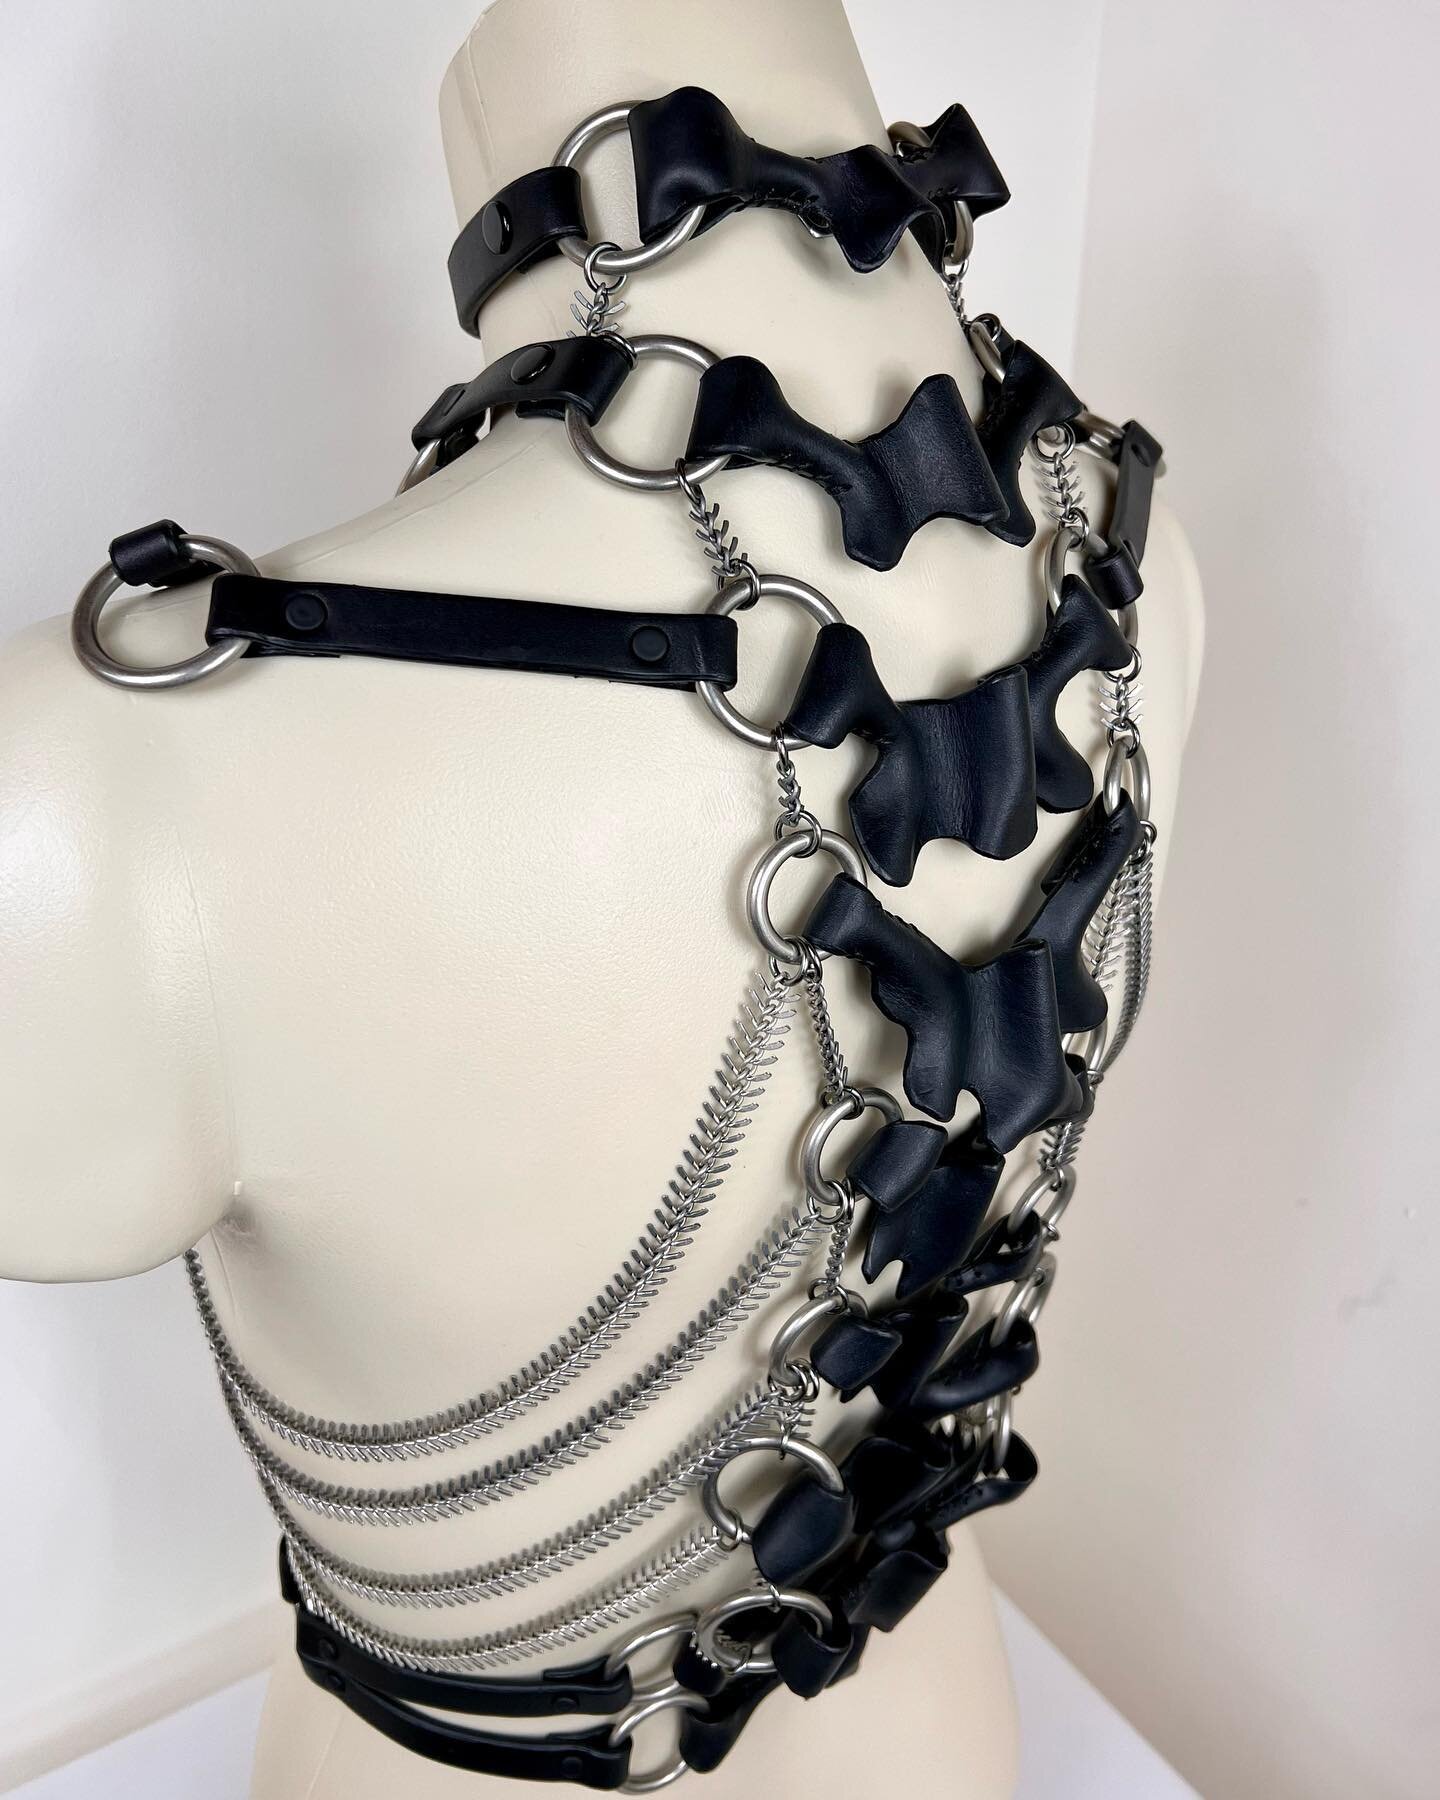 ✨Now available for sale✨
It&rsquo;s my one-of-a-kind, hand sculpted, leather skeletal harness with chain ribs and details!
🖤
Email sarahmholm@gmail.com with questions (no DMs please). 
🖤
#leather #leathercraft #sculpture #bondage #skeleton #spine #